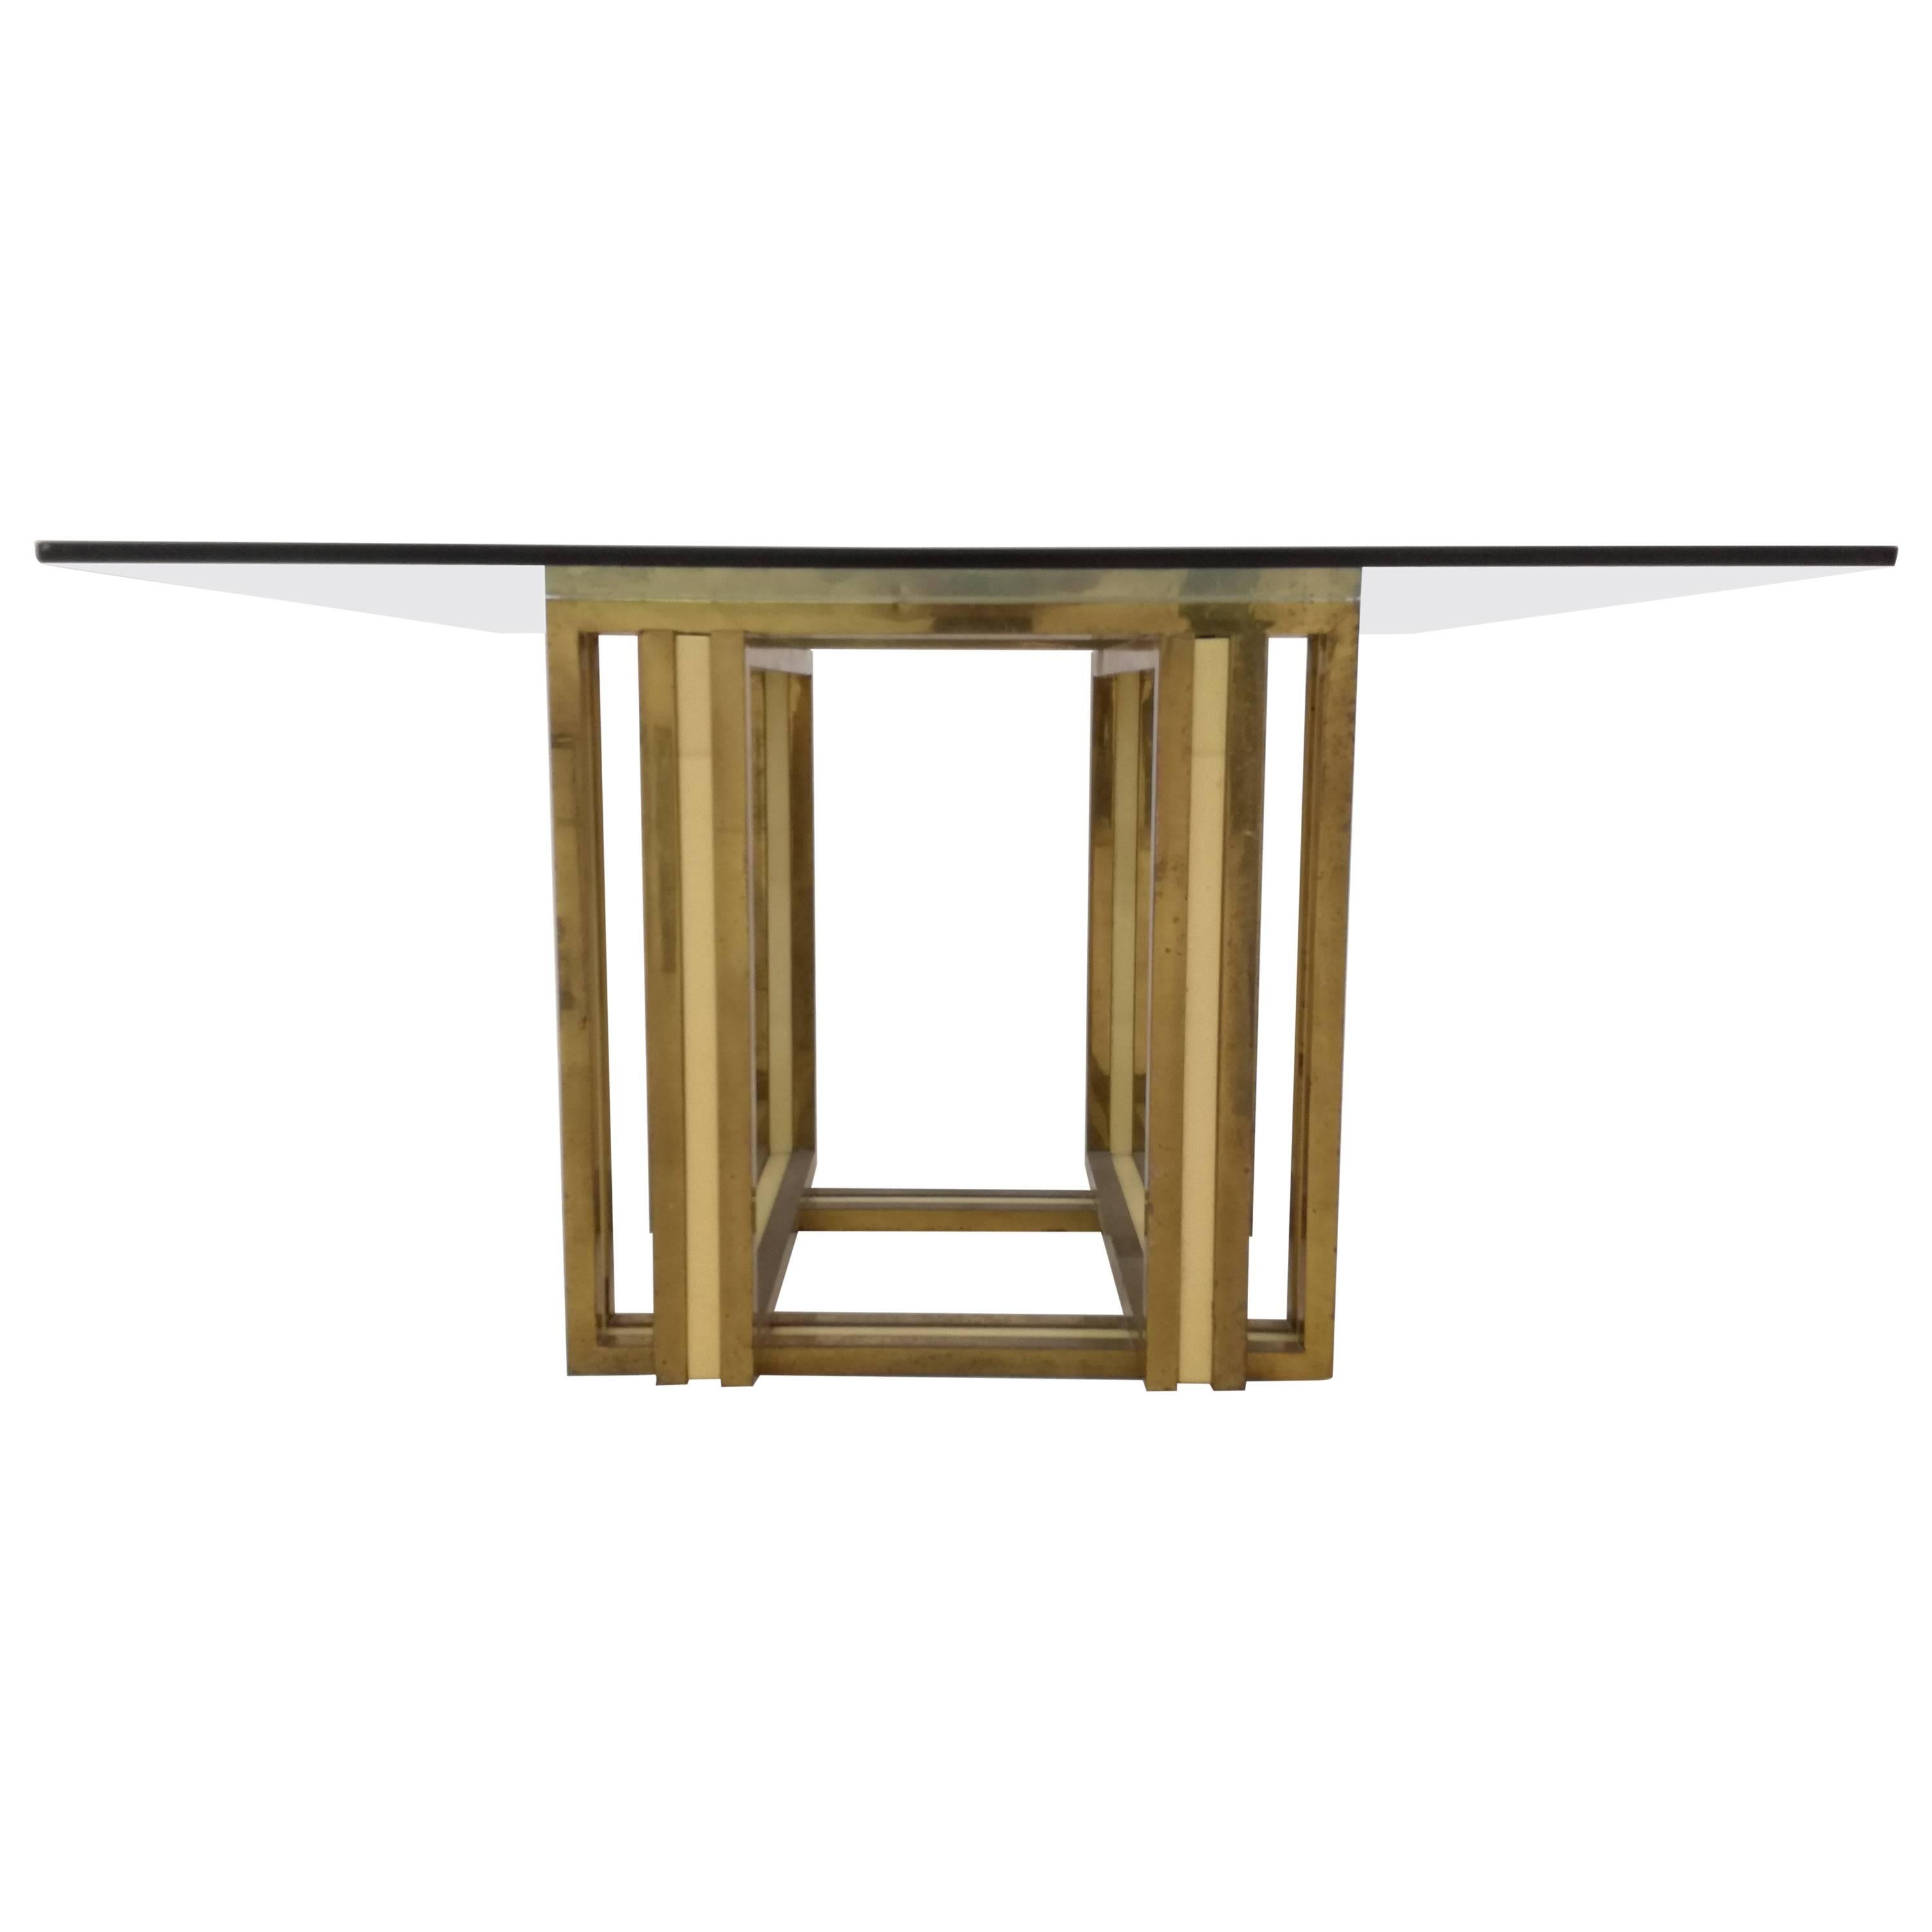 Nucci Valsecchi Table with Glass Top For Sale